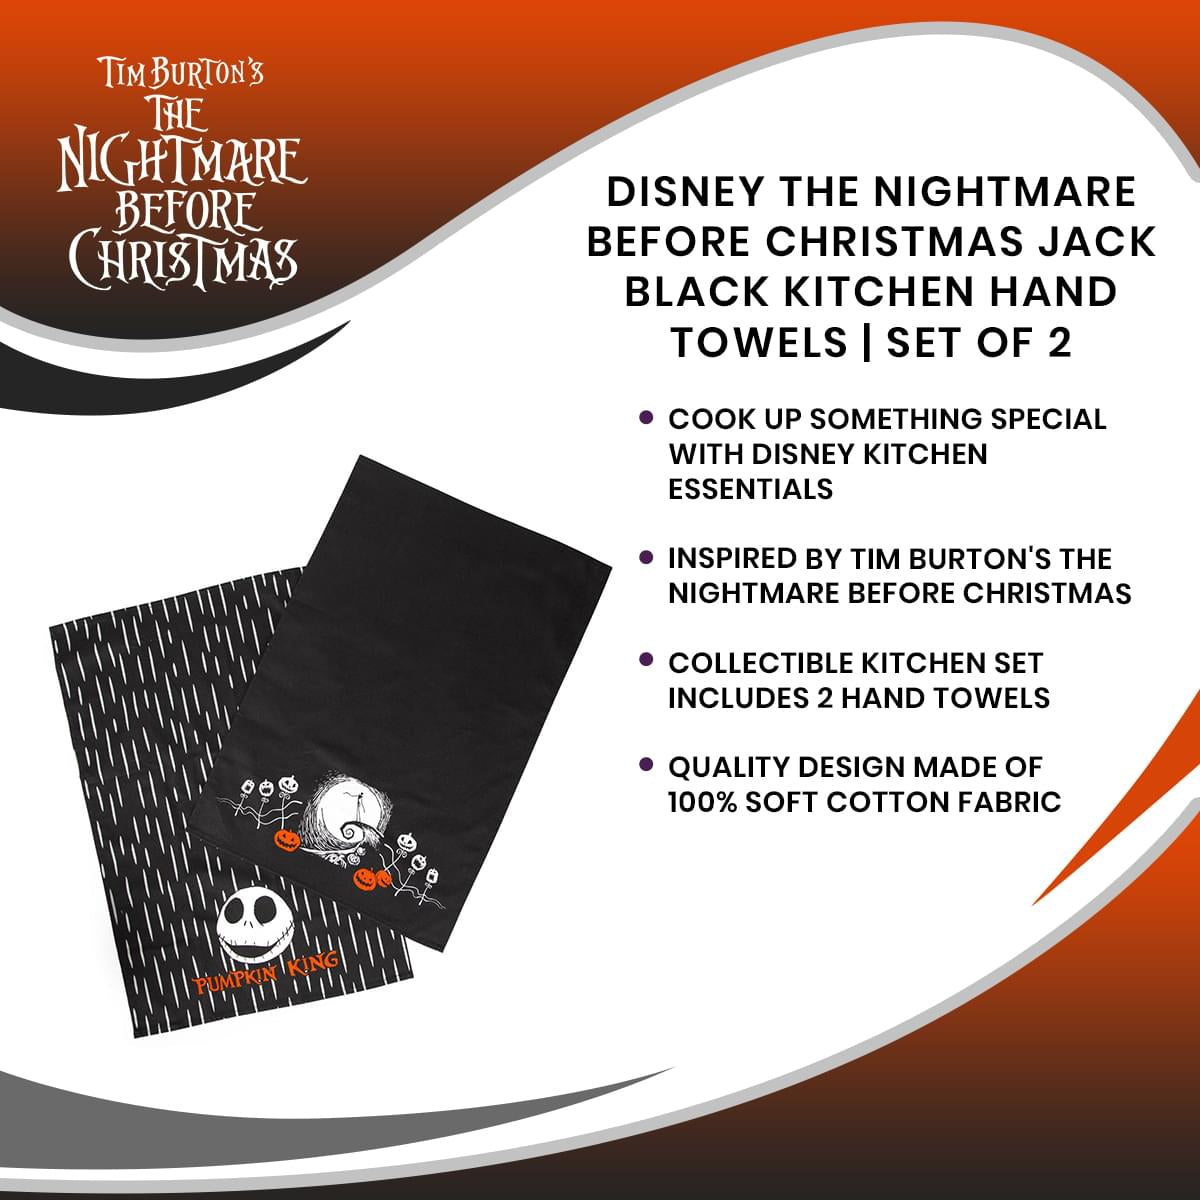 Disney The Nightmare Before Christmas Jack Black Kitchen Hand Towels | Set of 2